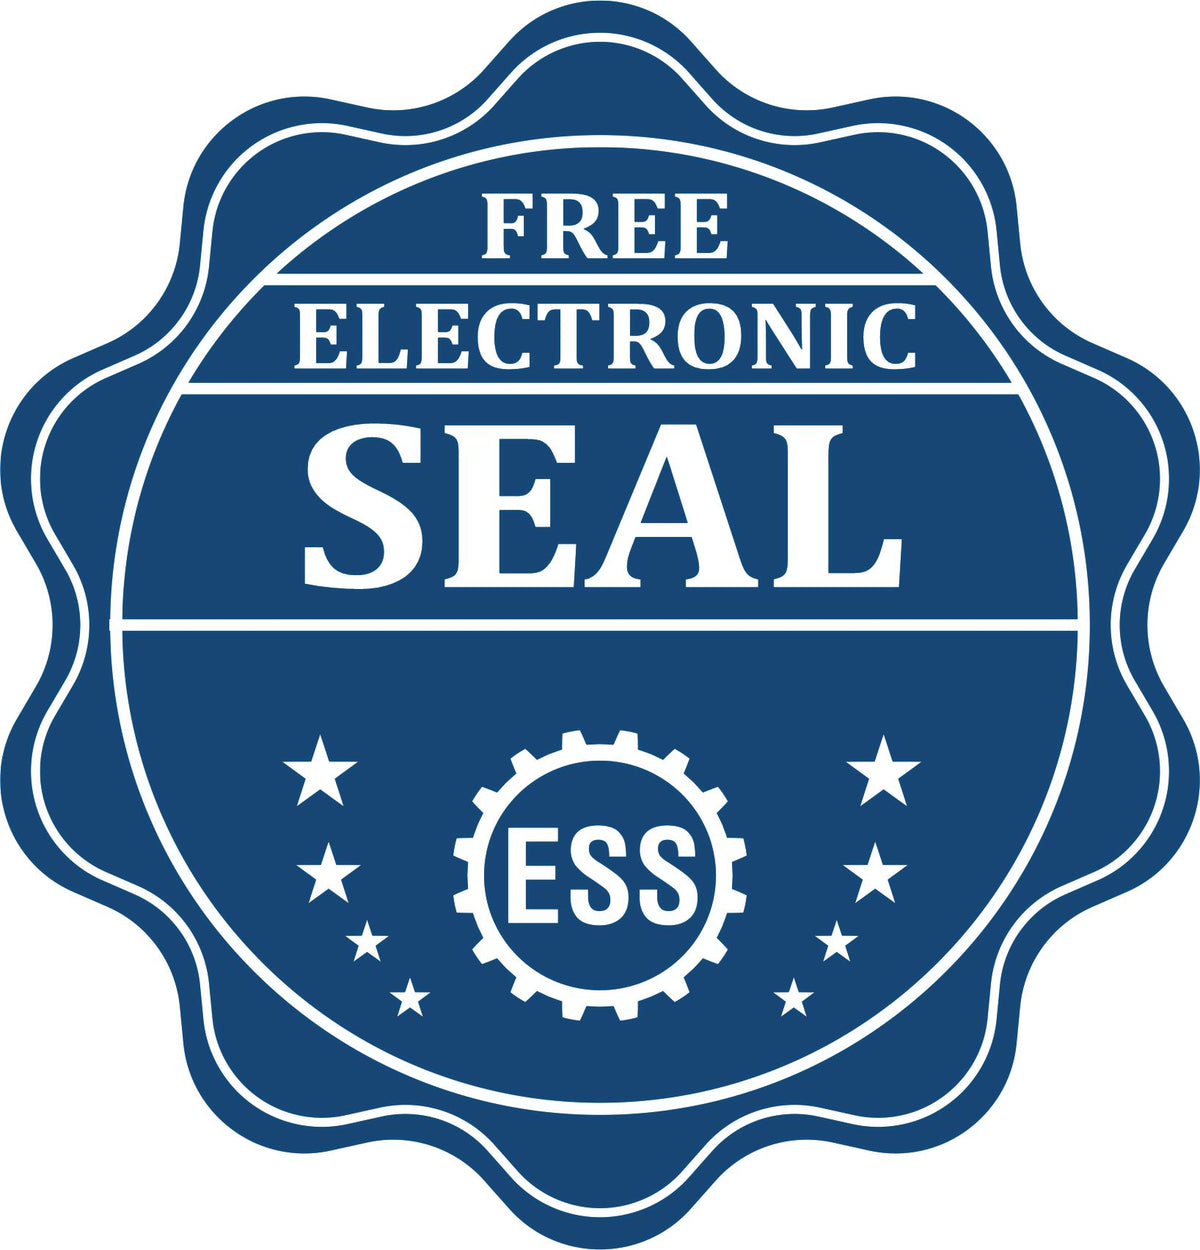 A badge showing a free electronic seal for the Slim Pre-Inked Guam Land Surveyor Seal Stamp with stars and the ESS gear on the emblem.